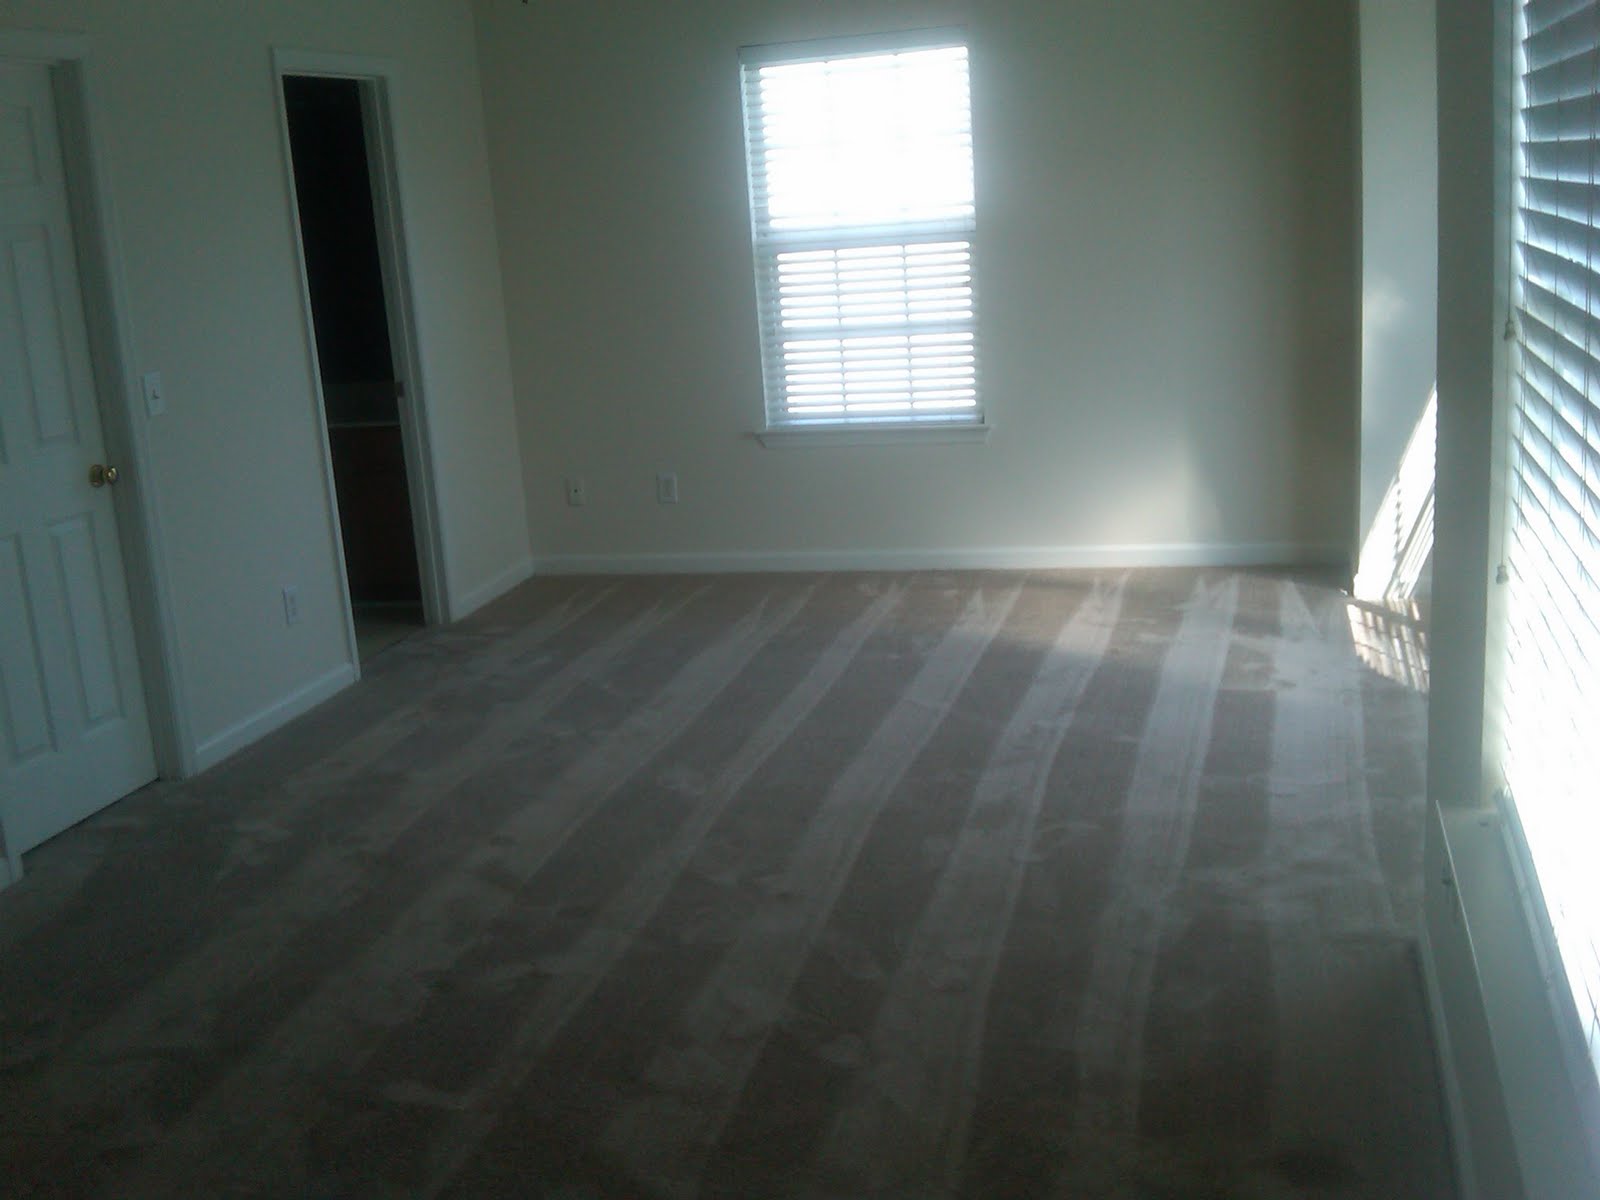 Country Flooring Direct Rental Property Carpet Install In